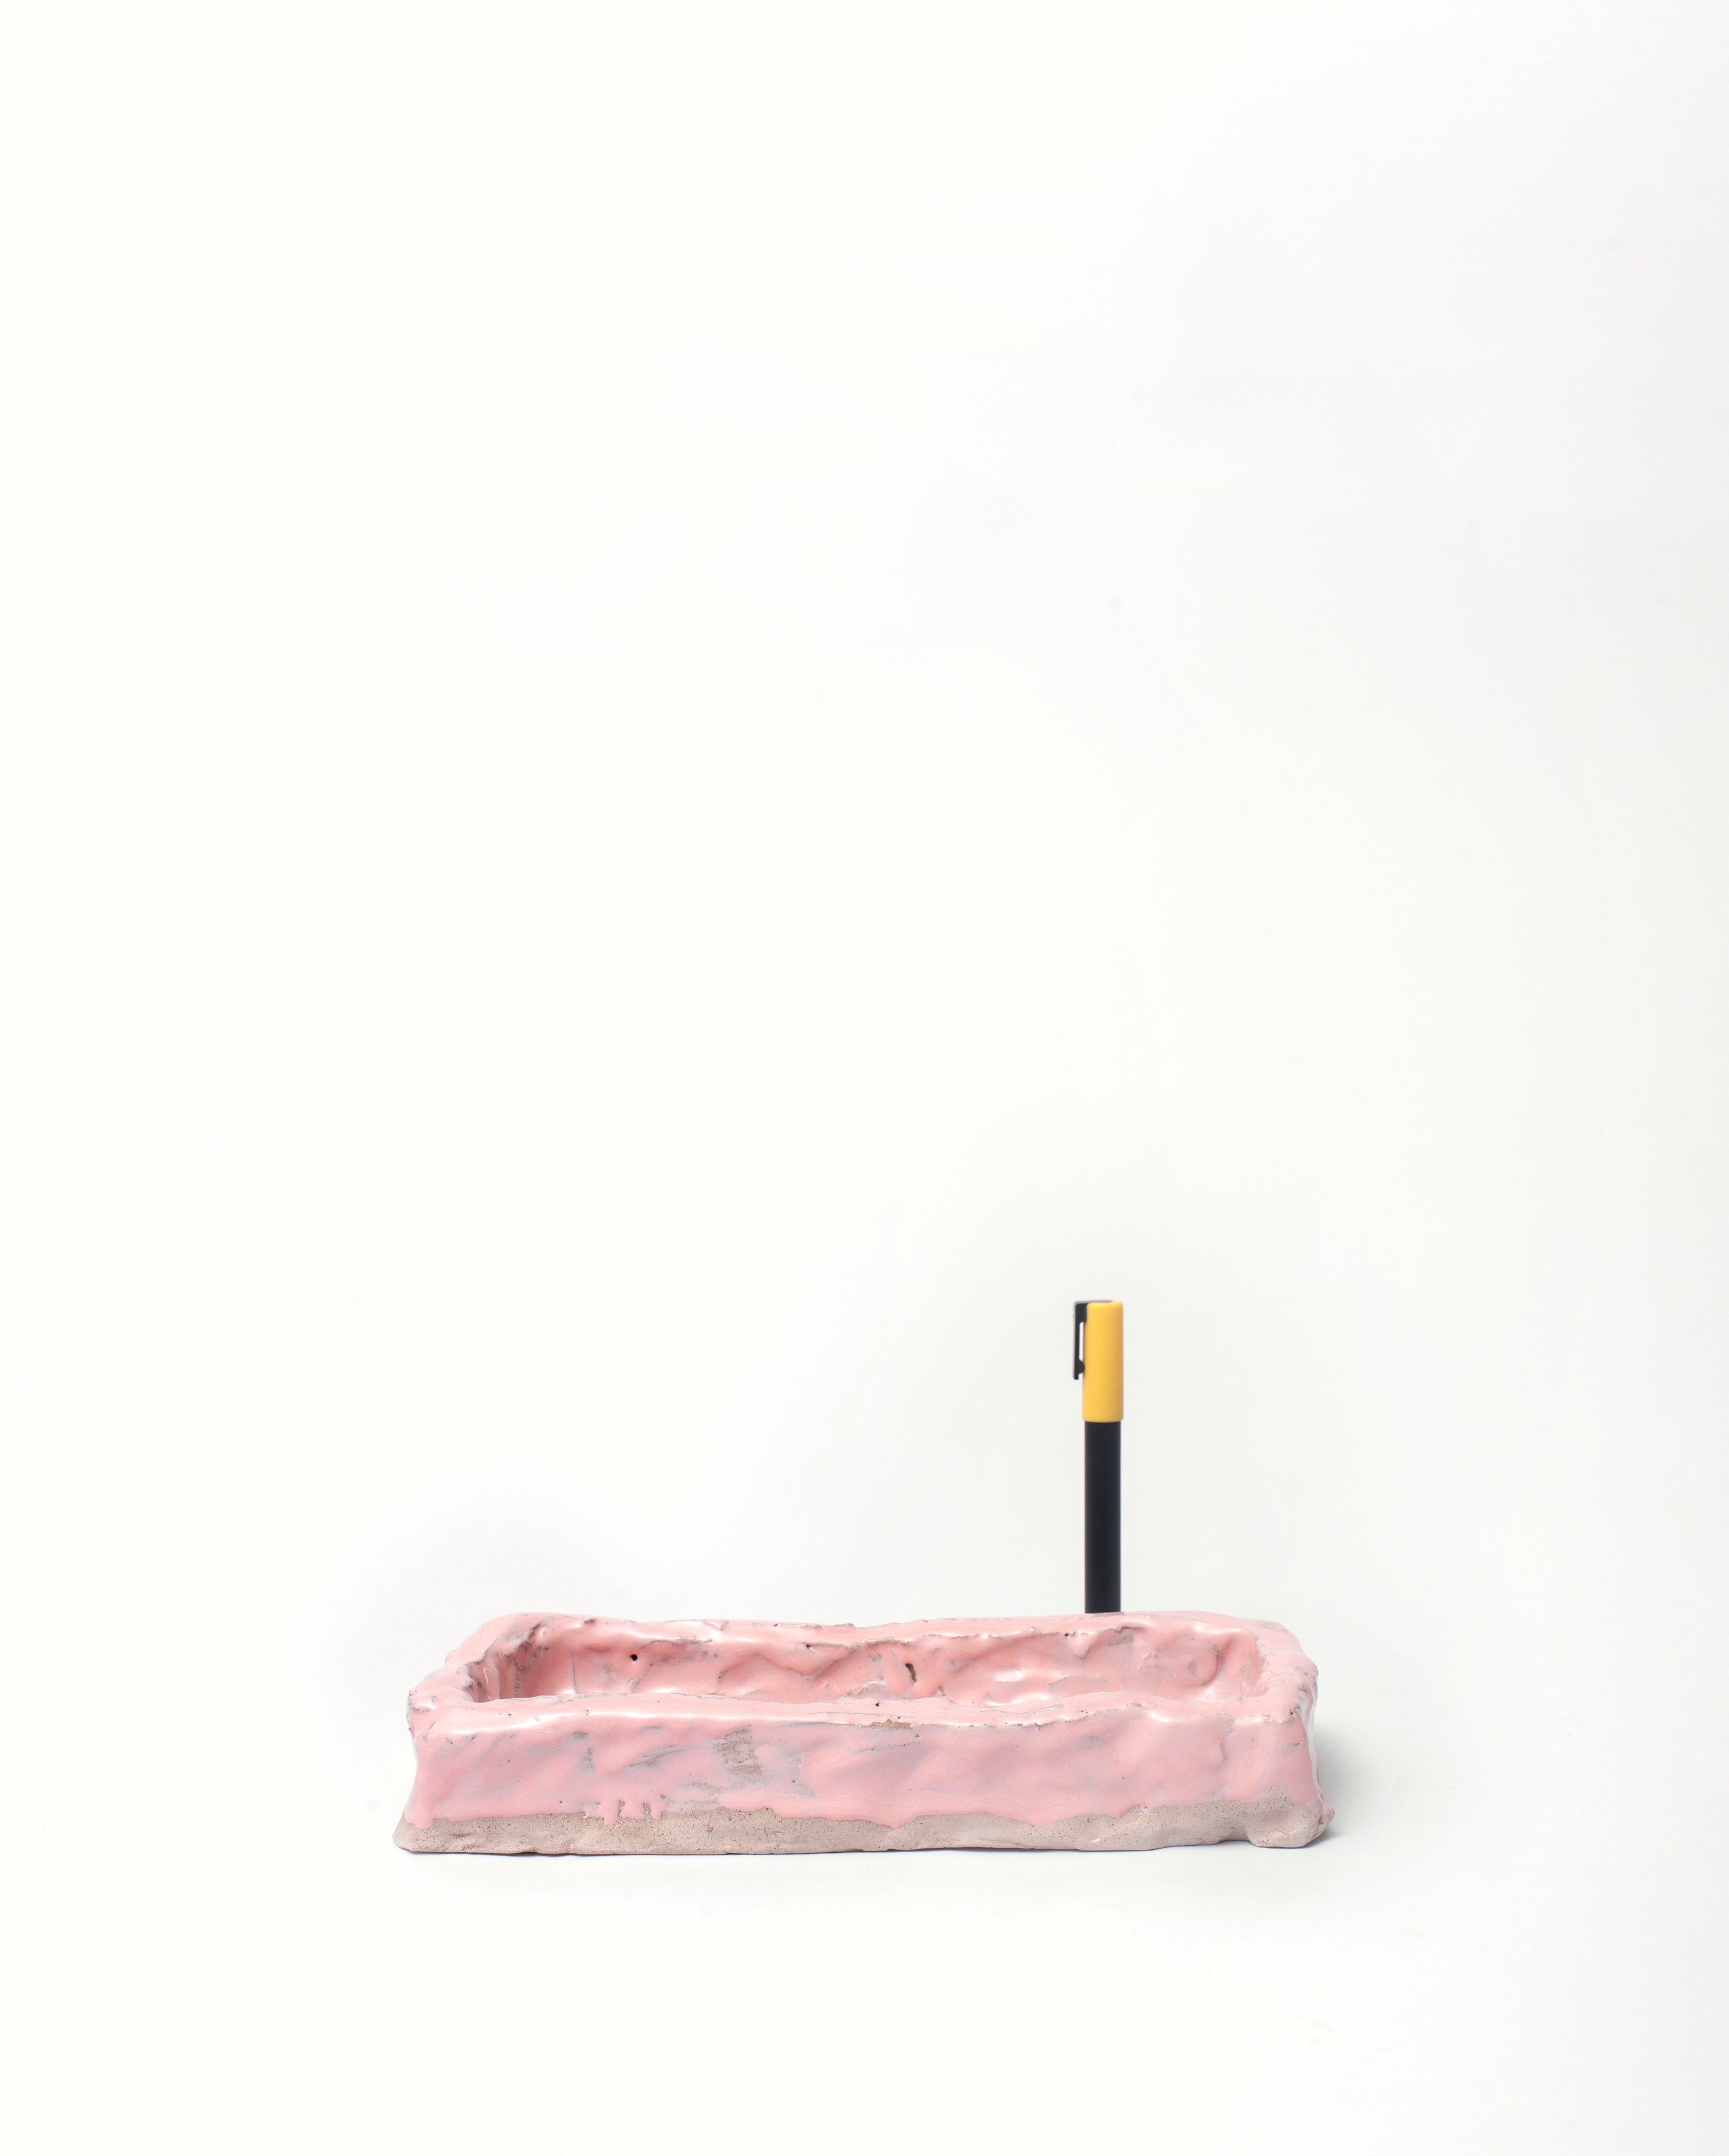 Handmade ceramic organizer object in pink with pen in the right corner white background